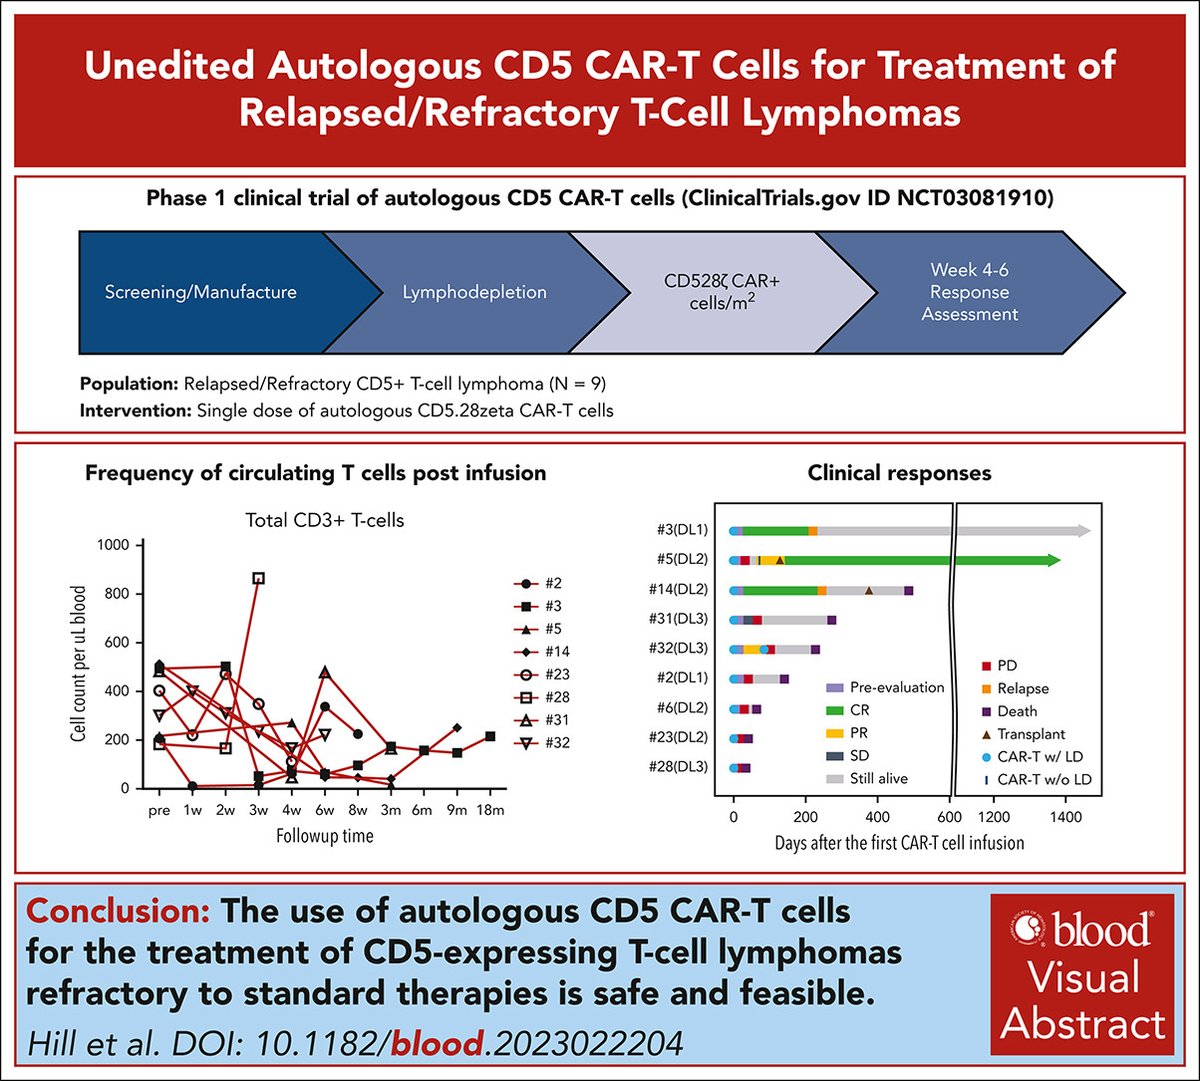 Excited to share first results of unedited CD5 CAR T in r/r T-cell lymphoma from a trial led by @HillLaQuisa and R.Rouce @CAGTHouston Infusions were safe and responses durable, with 2 pts still in CR 5+ years later. Multicenter Phase 2 later this year. sciencedirect.com/science/articl…